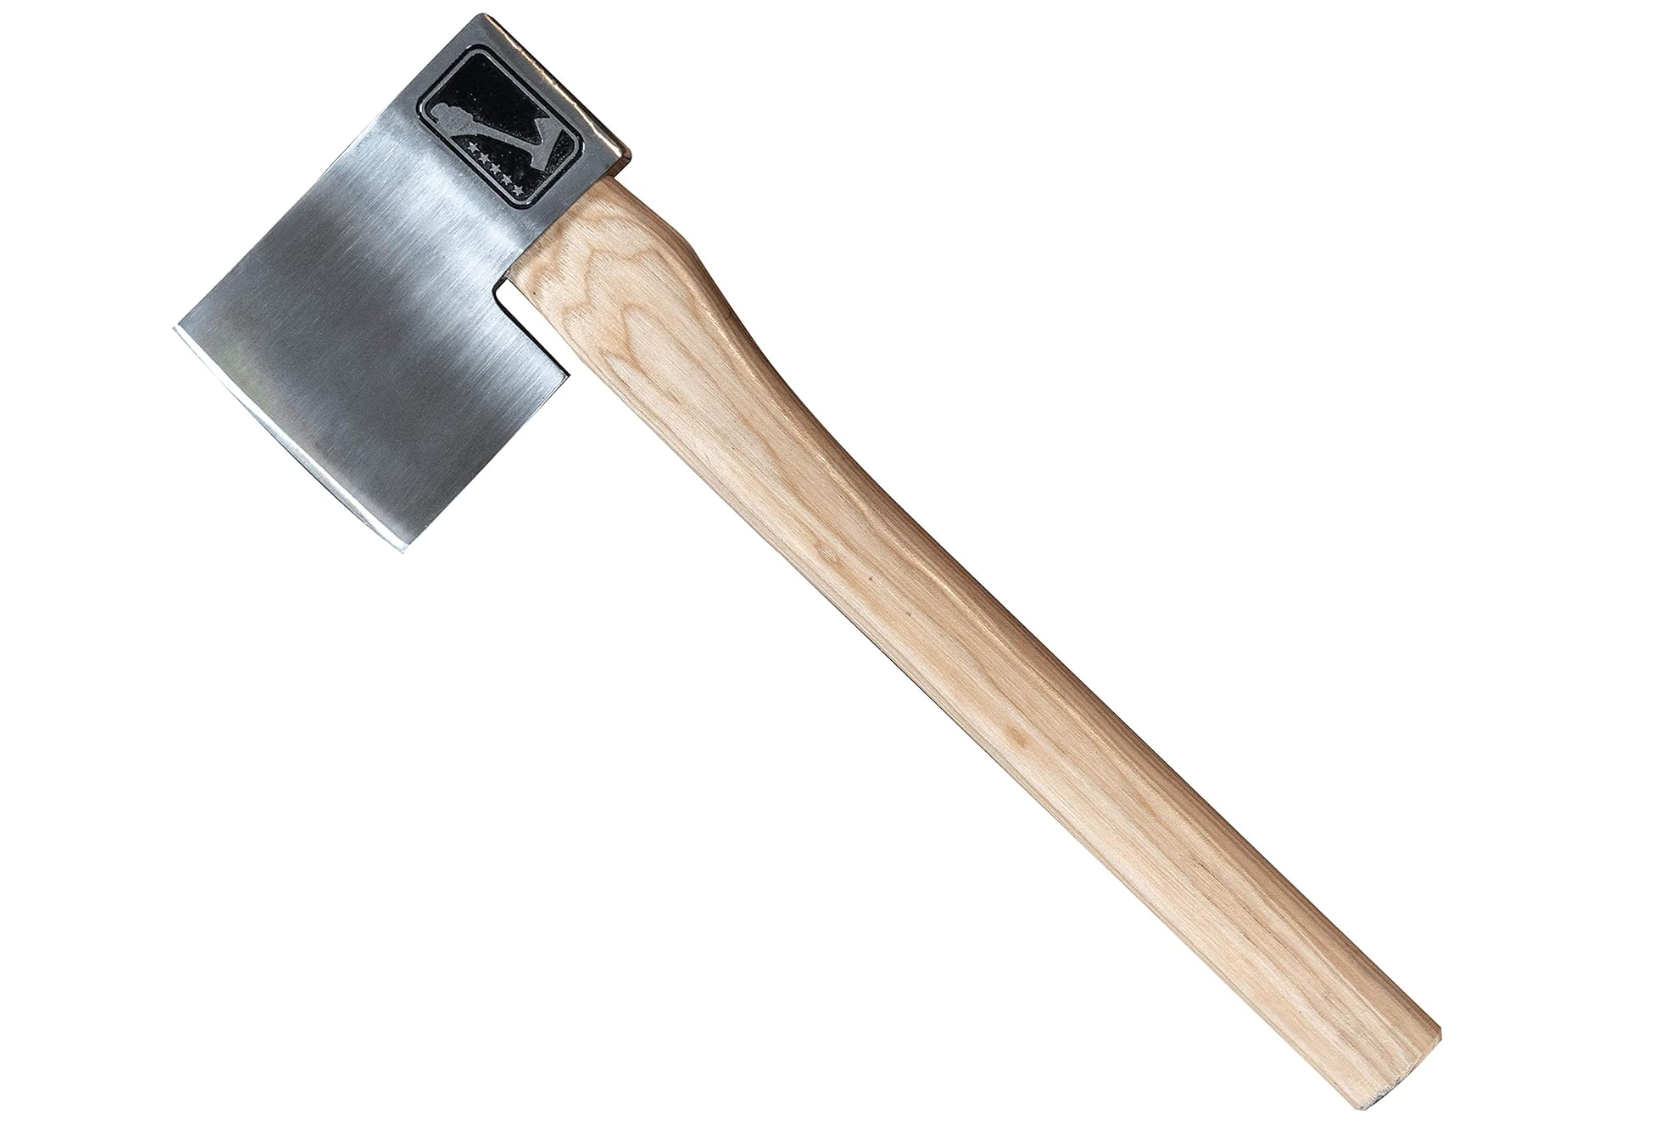 How To Sharpen Your Hatchet or Axe Like a PRO